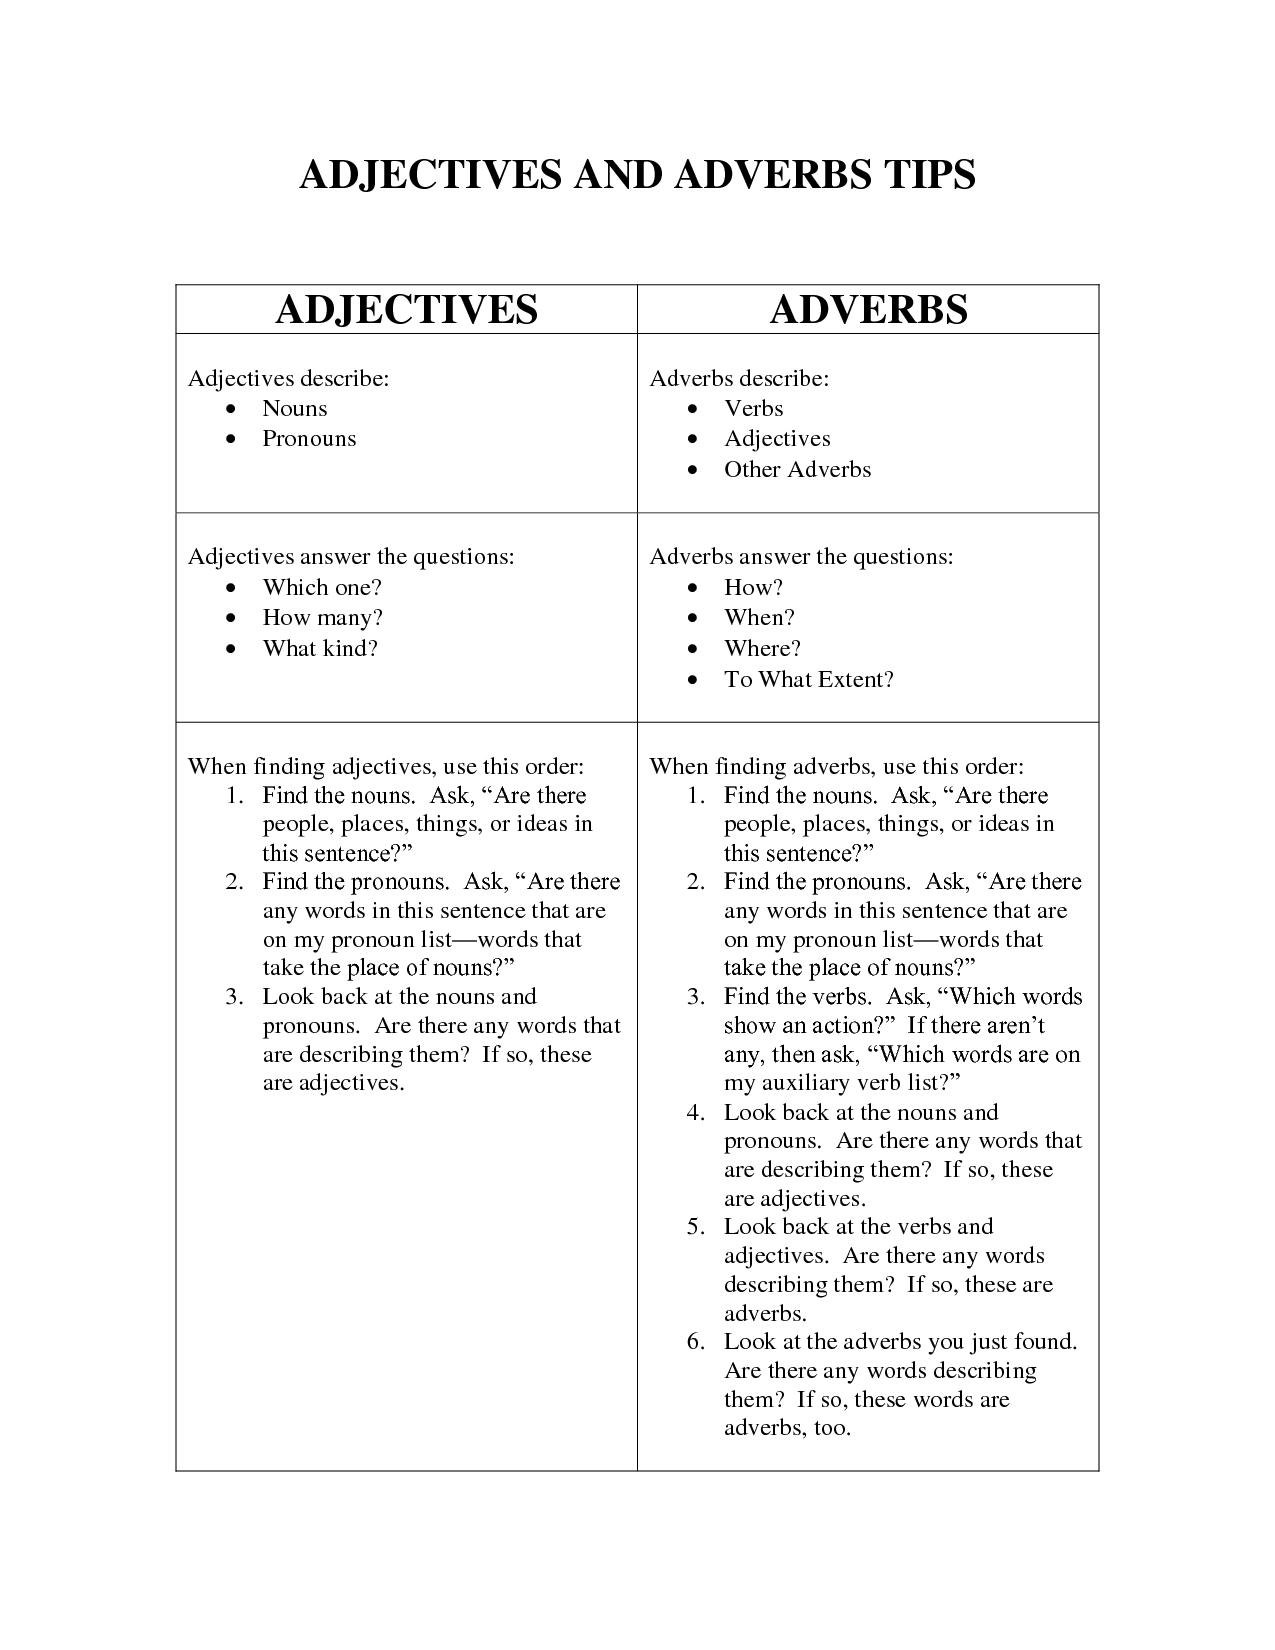 find-the-nouns-adjectives-worksheets-for-grade-1-in-2021-nouns-and-adjectives-adjective